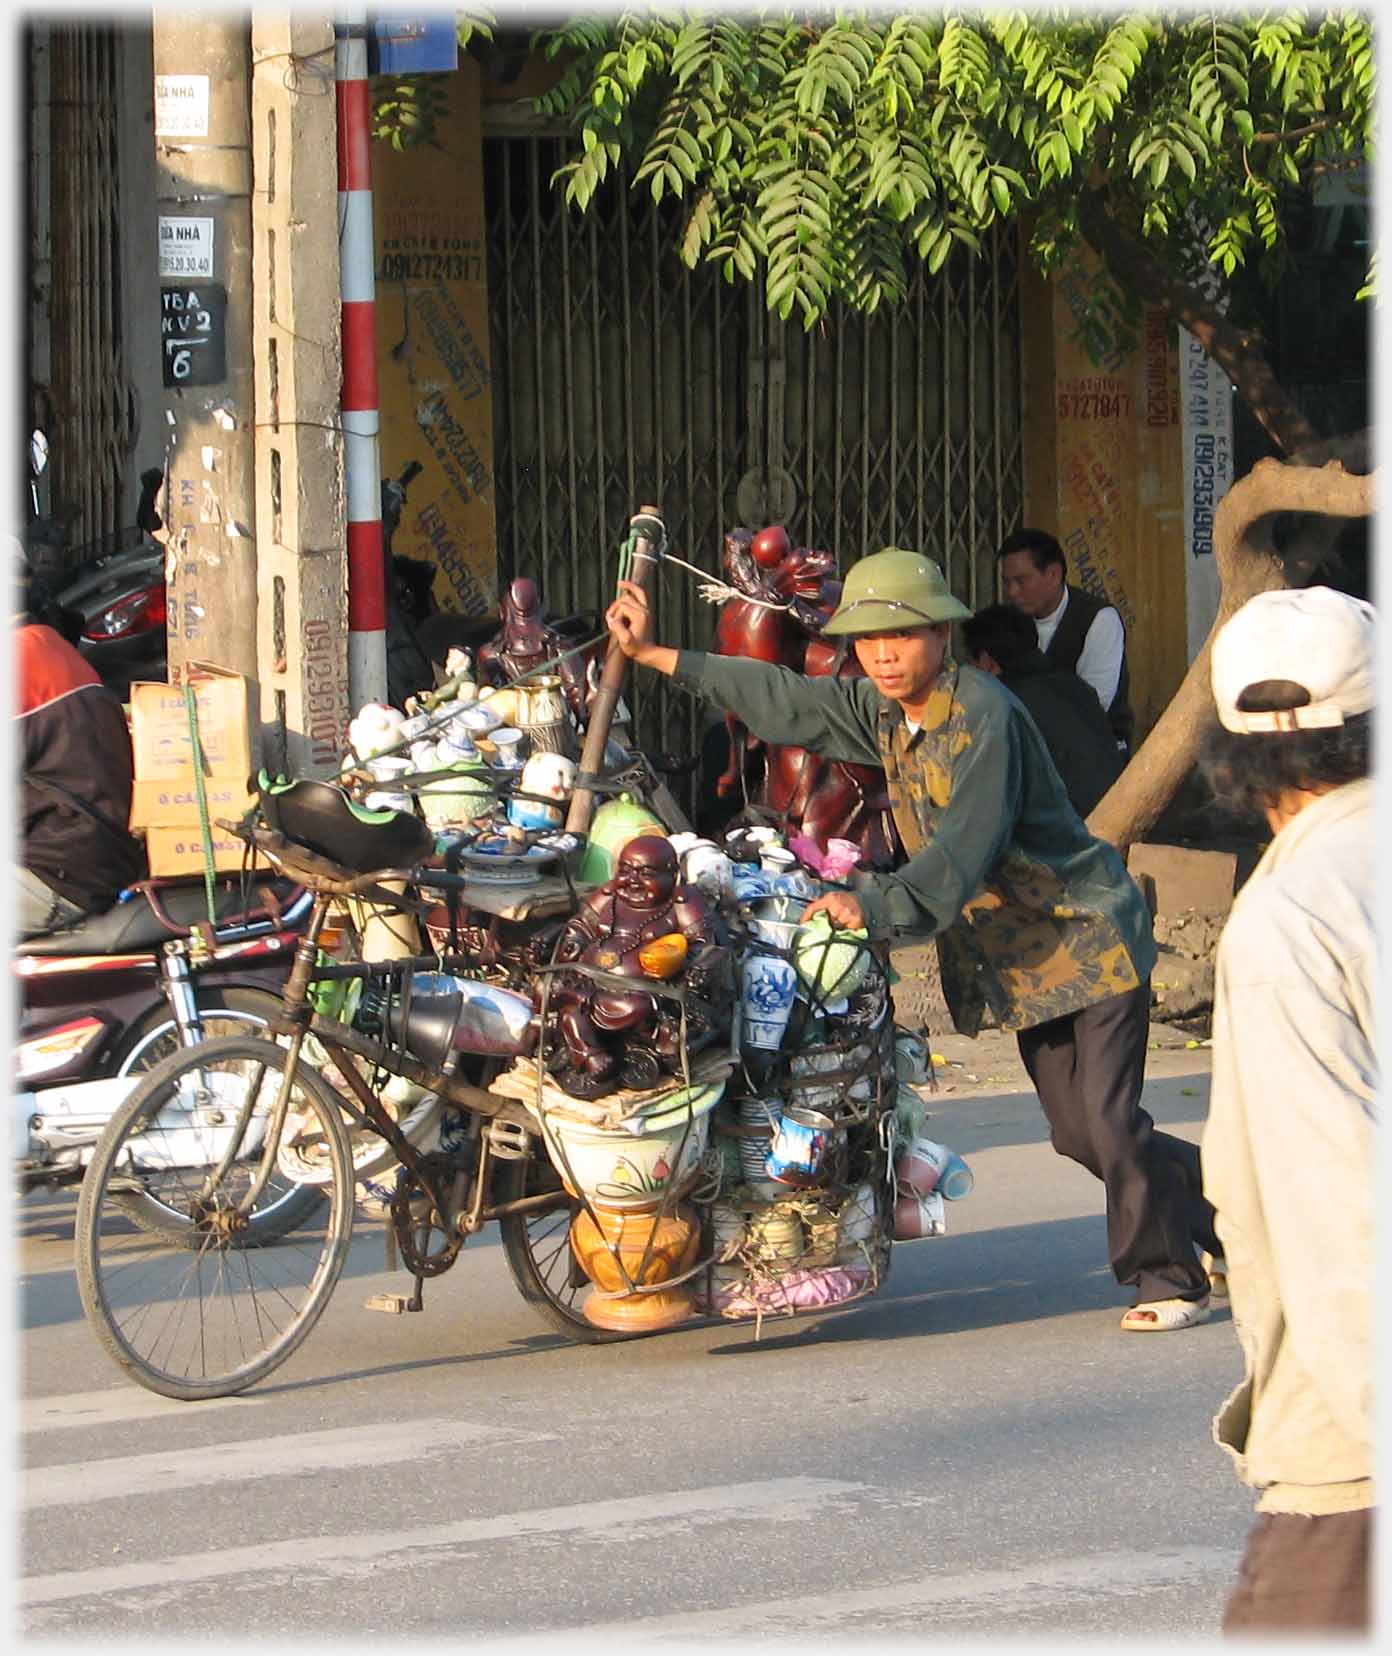 Man leaning hard into pushing his heavy load of ceramics on a bike, using a pole extension.